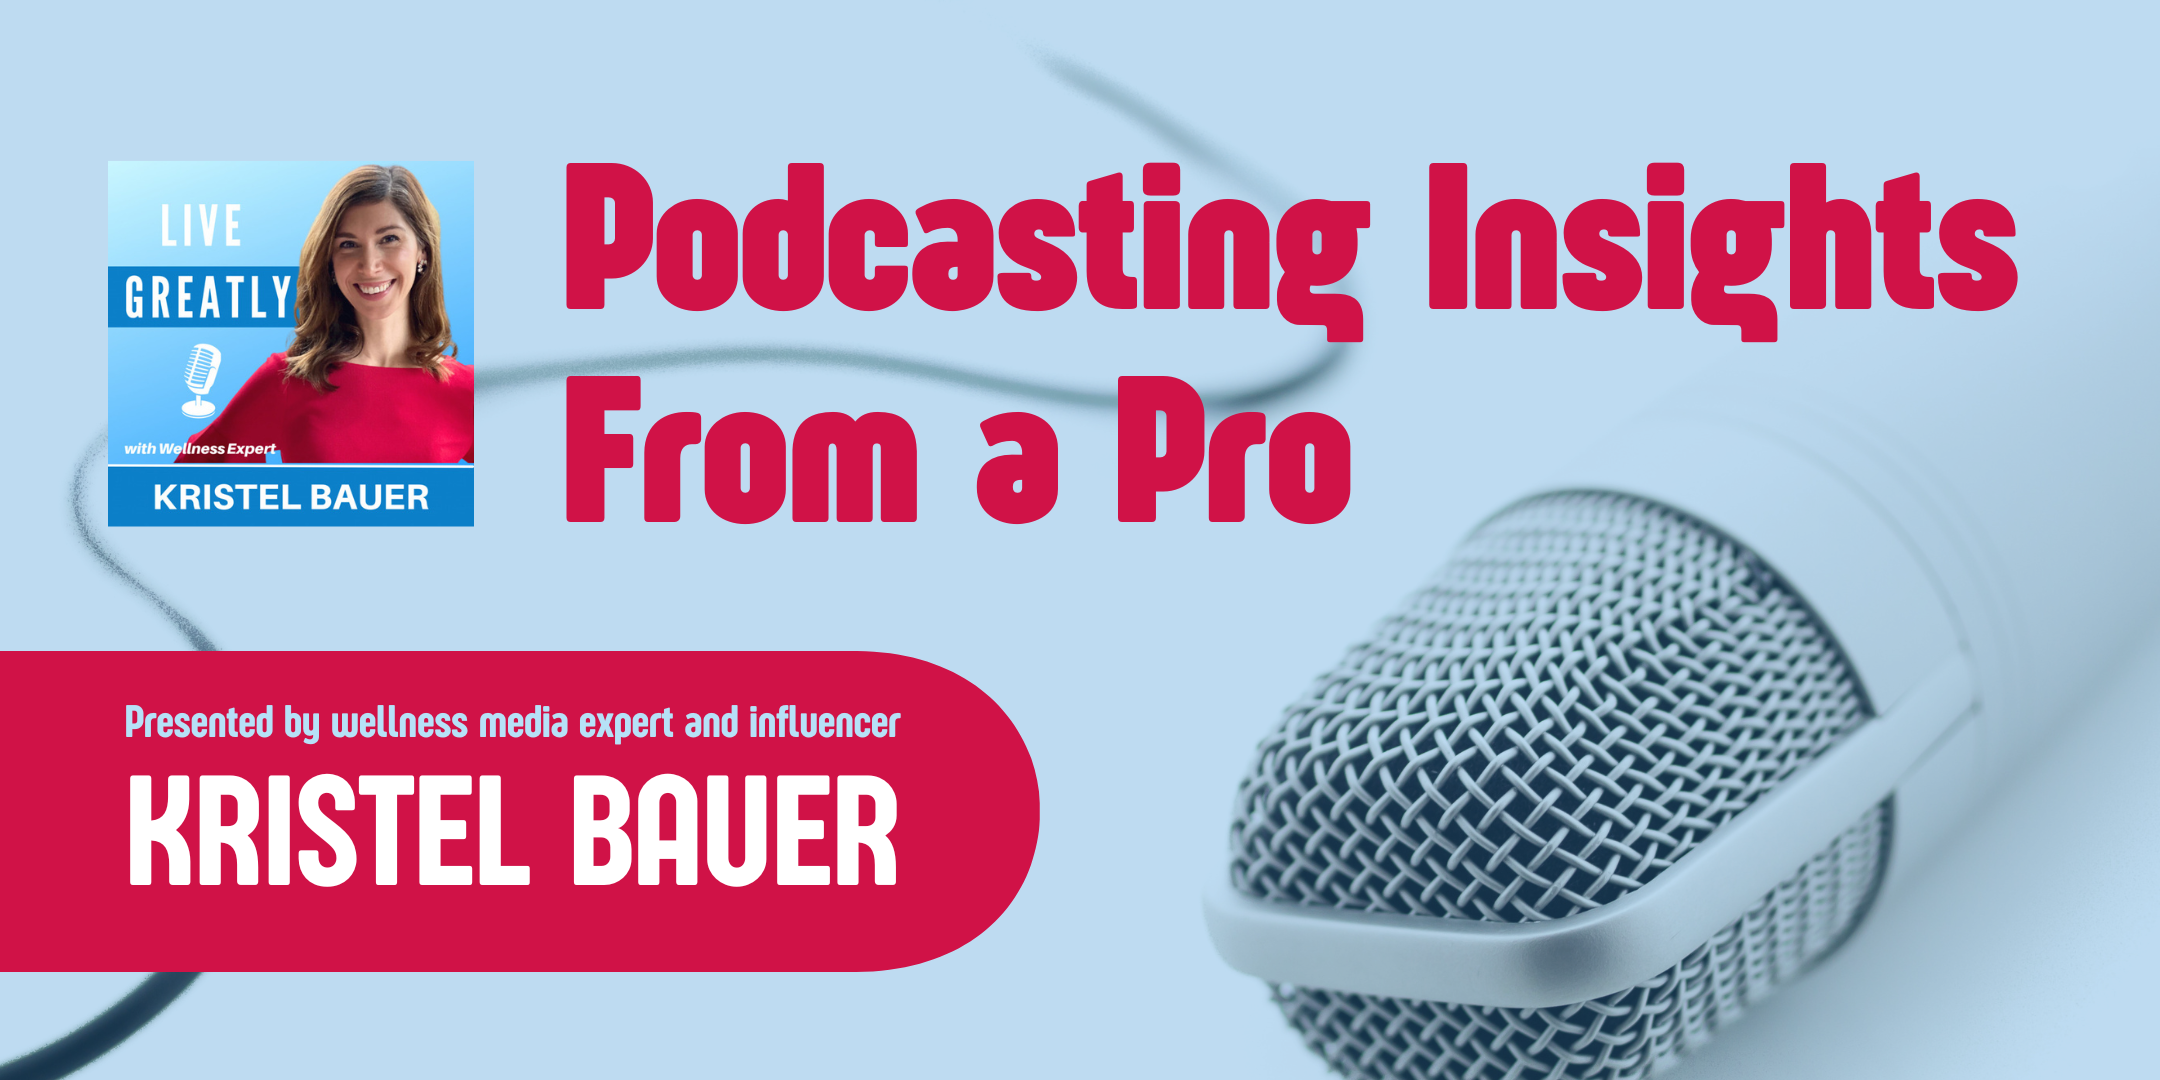 image of "Podcasting Insights from a Pro"